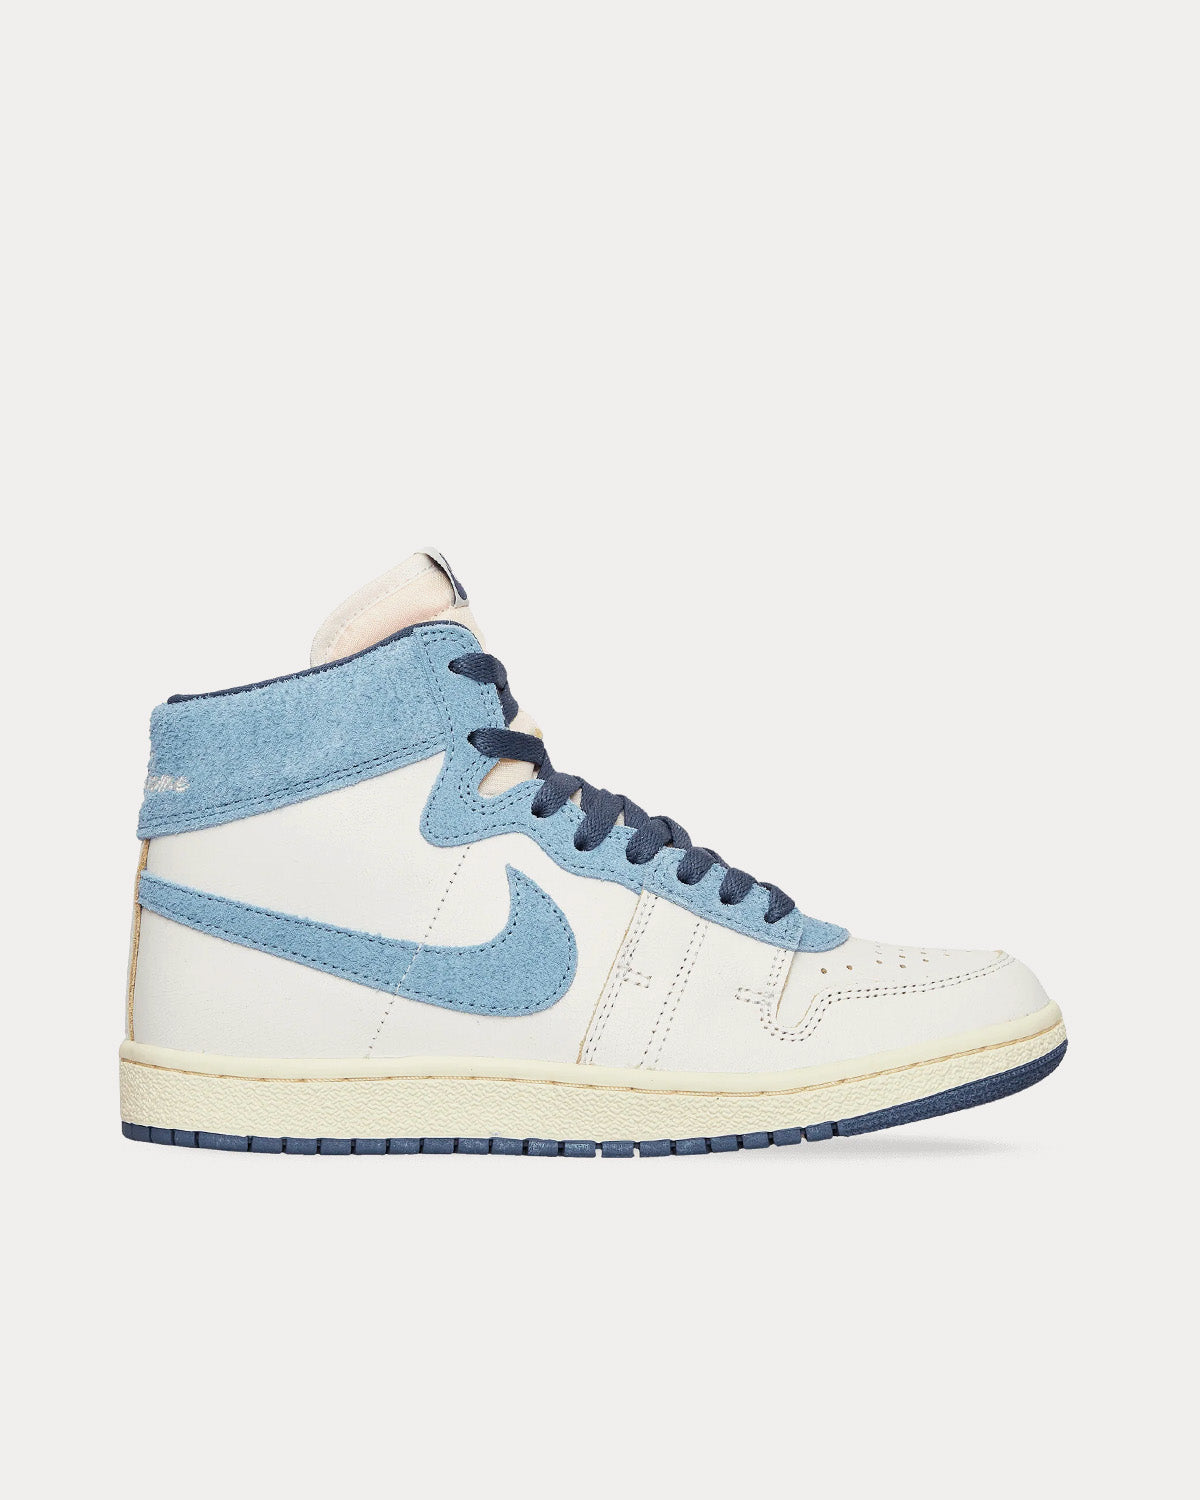 Jordan - Air Ship 'Lucky Shorts' Summit White / Diffused Blue High Top Sneakers